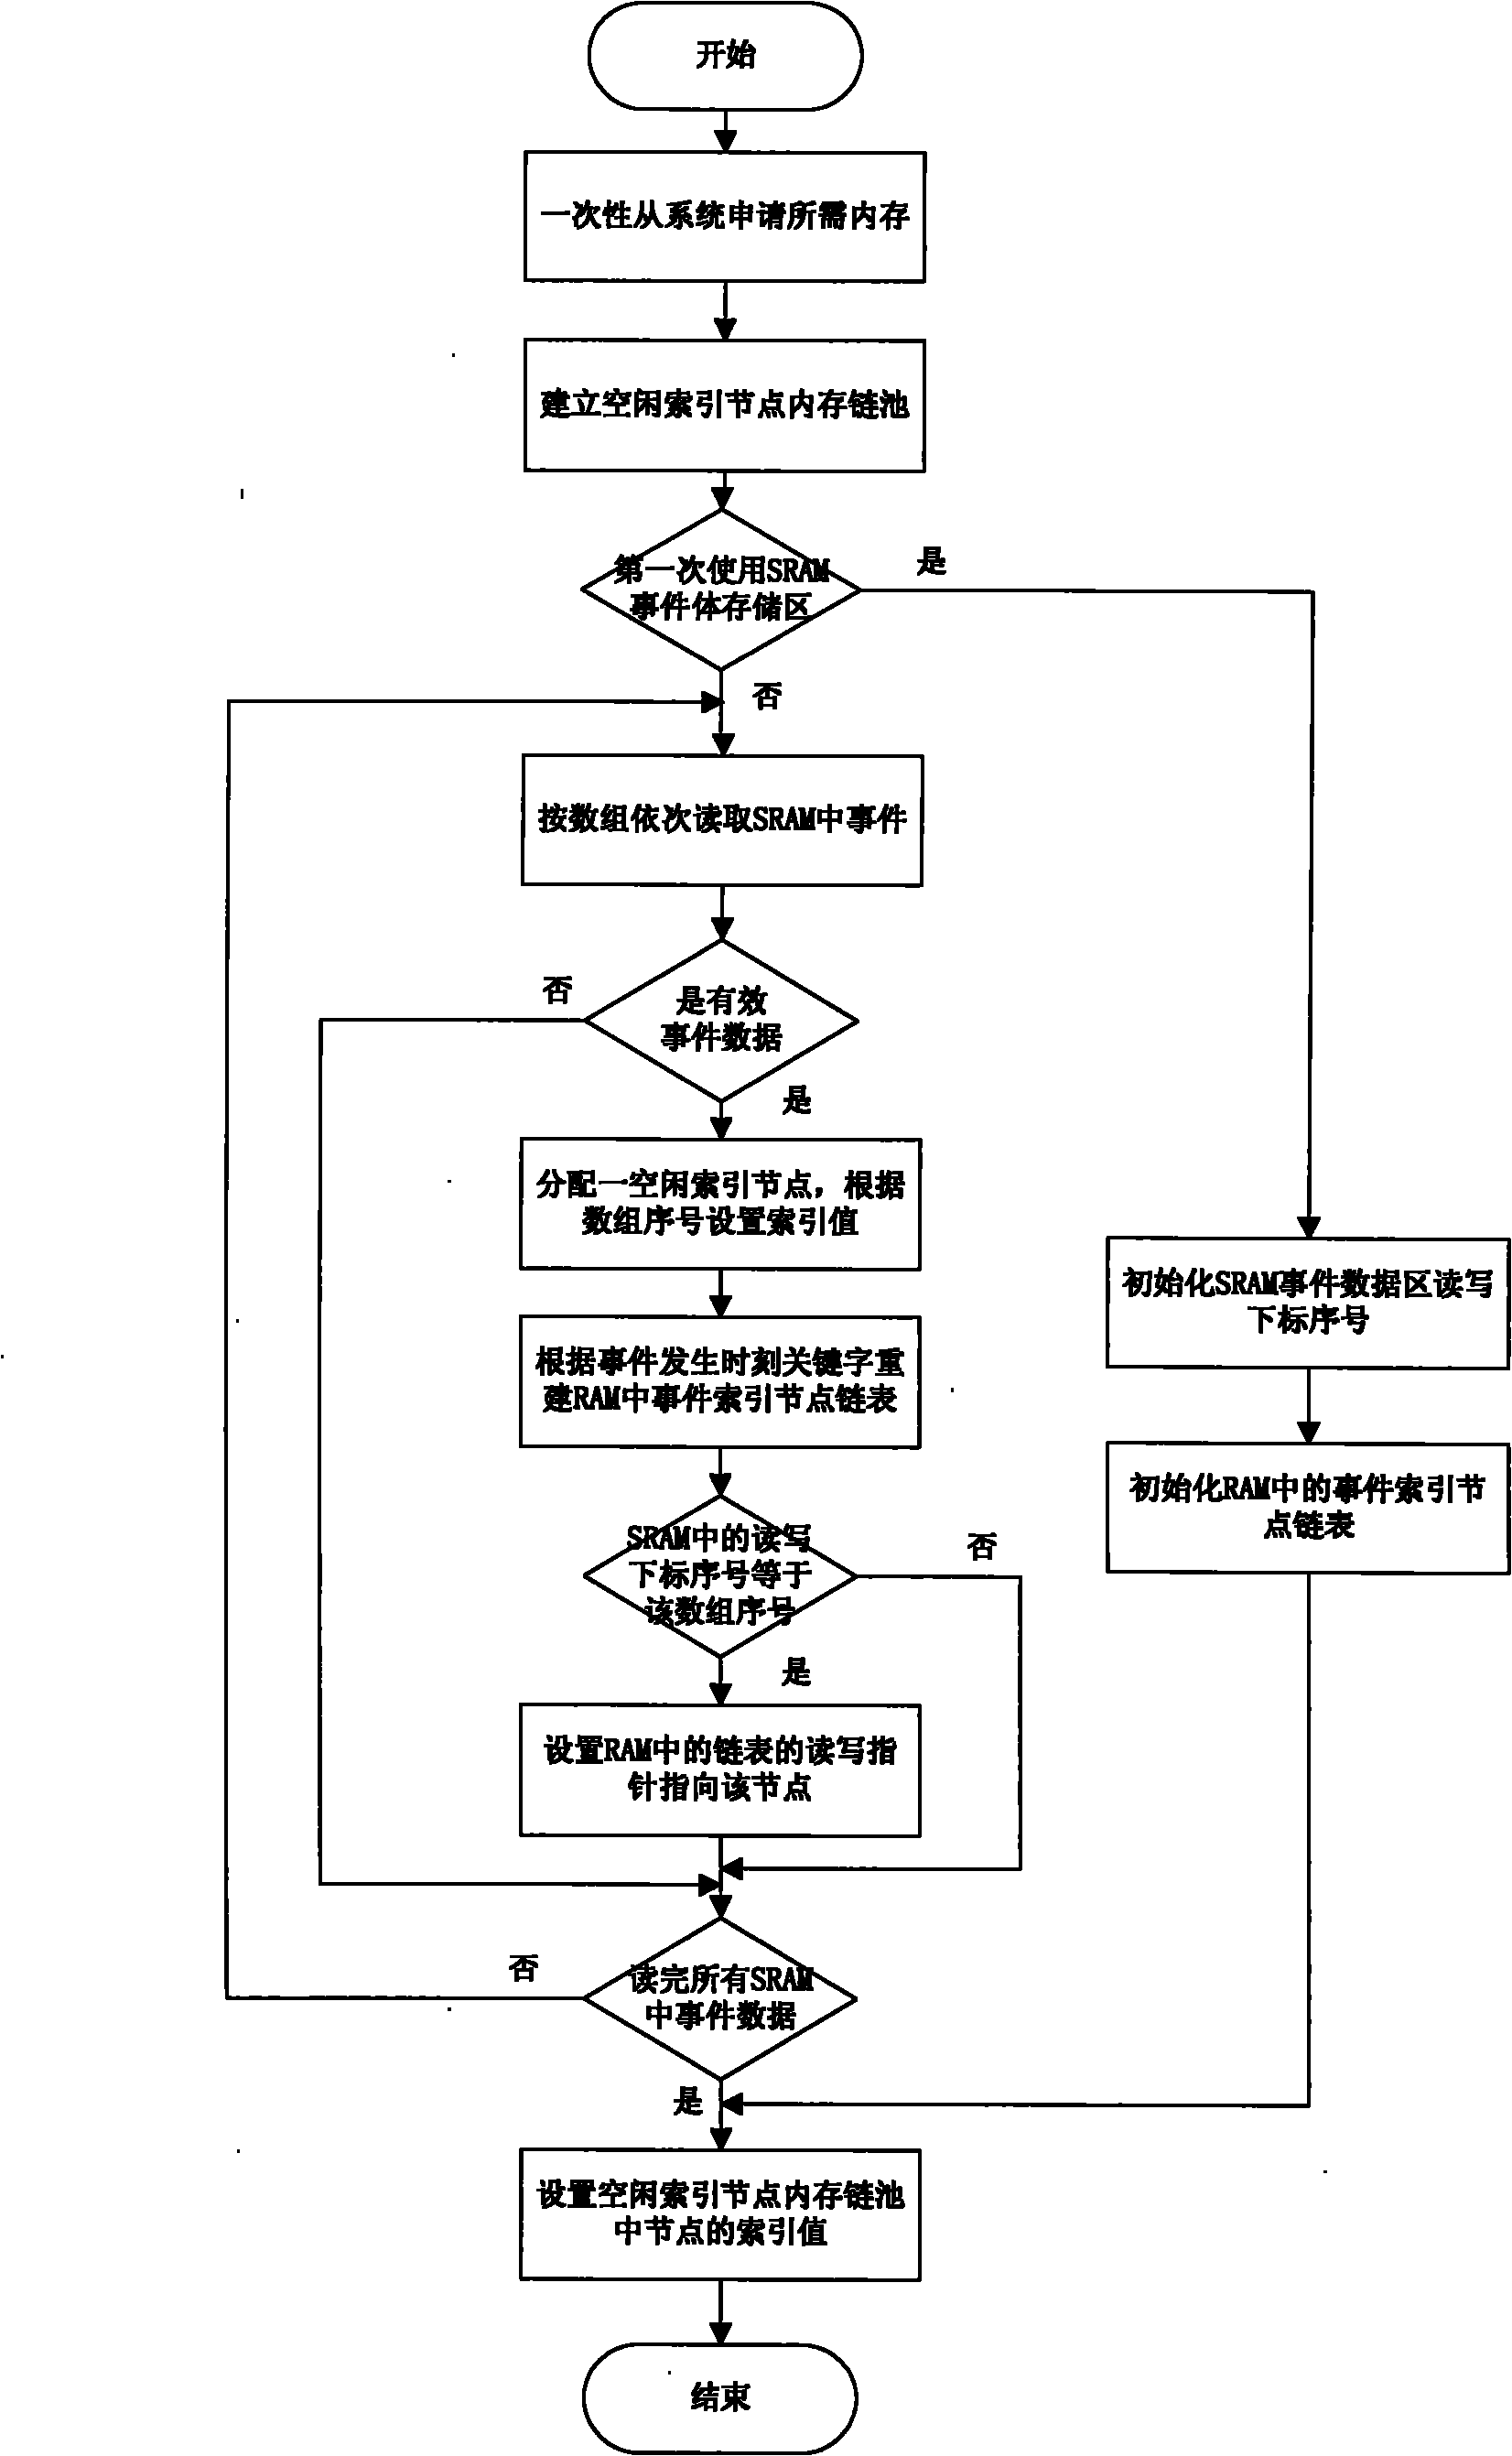 Real-time event management method for intelligent electronic equipment